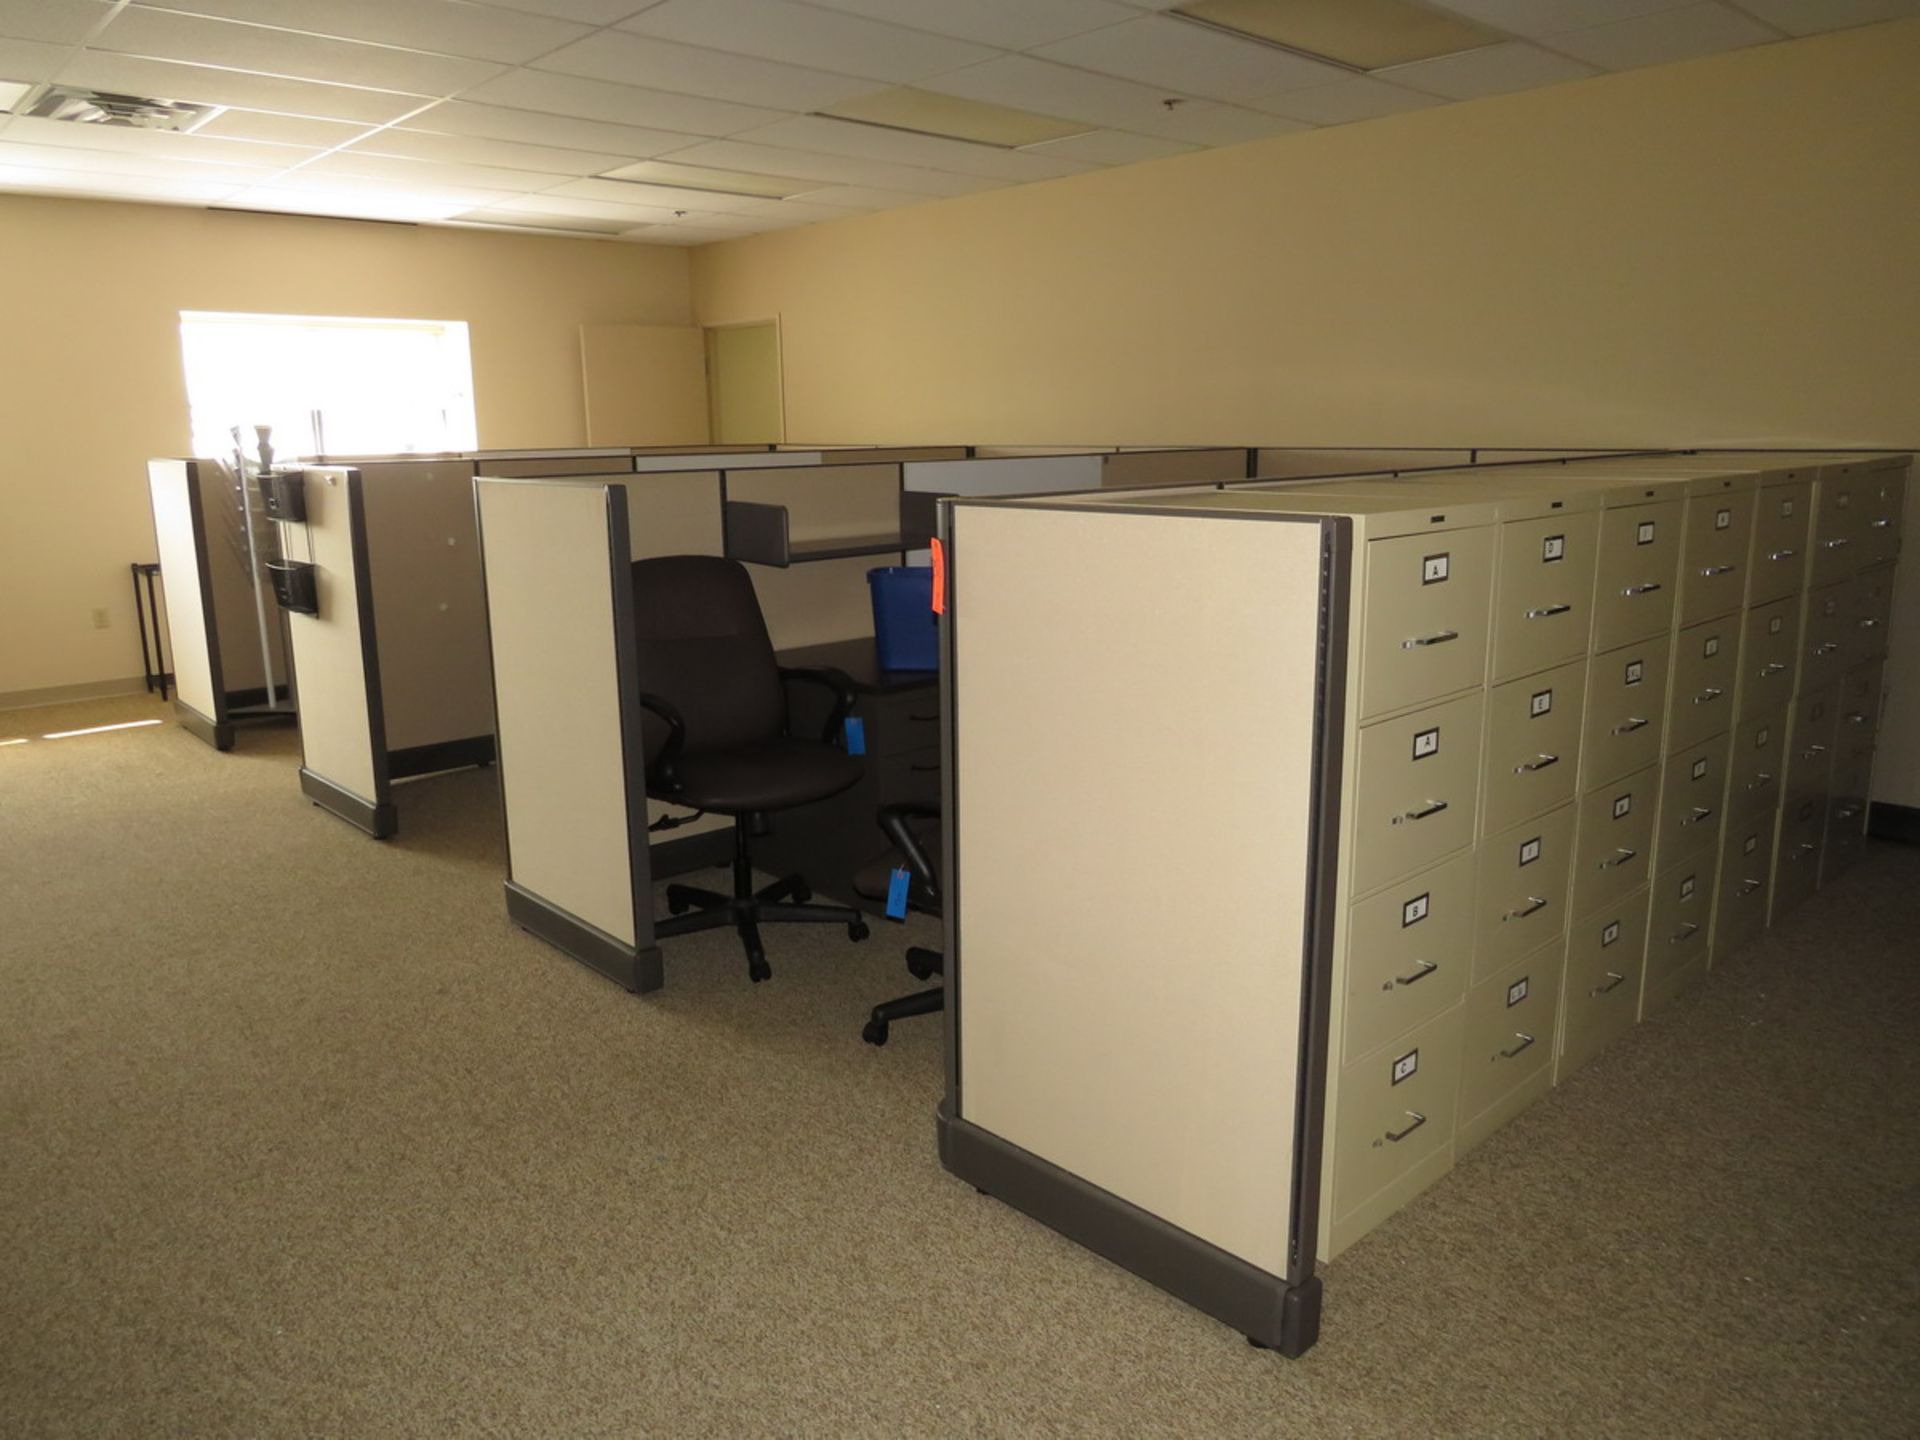 Office Furniture to Include: (4) Sections of Cubicles, (3) L-Shaped Desks, (7) 4-Drawer Metal